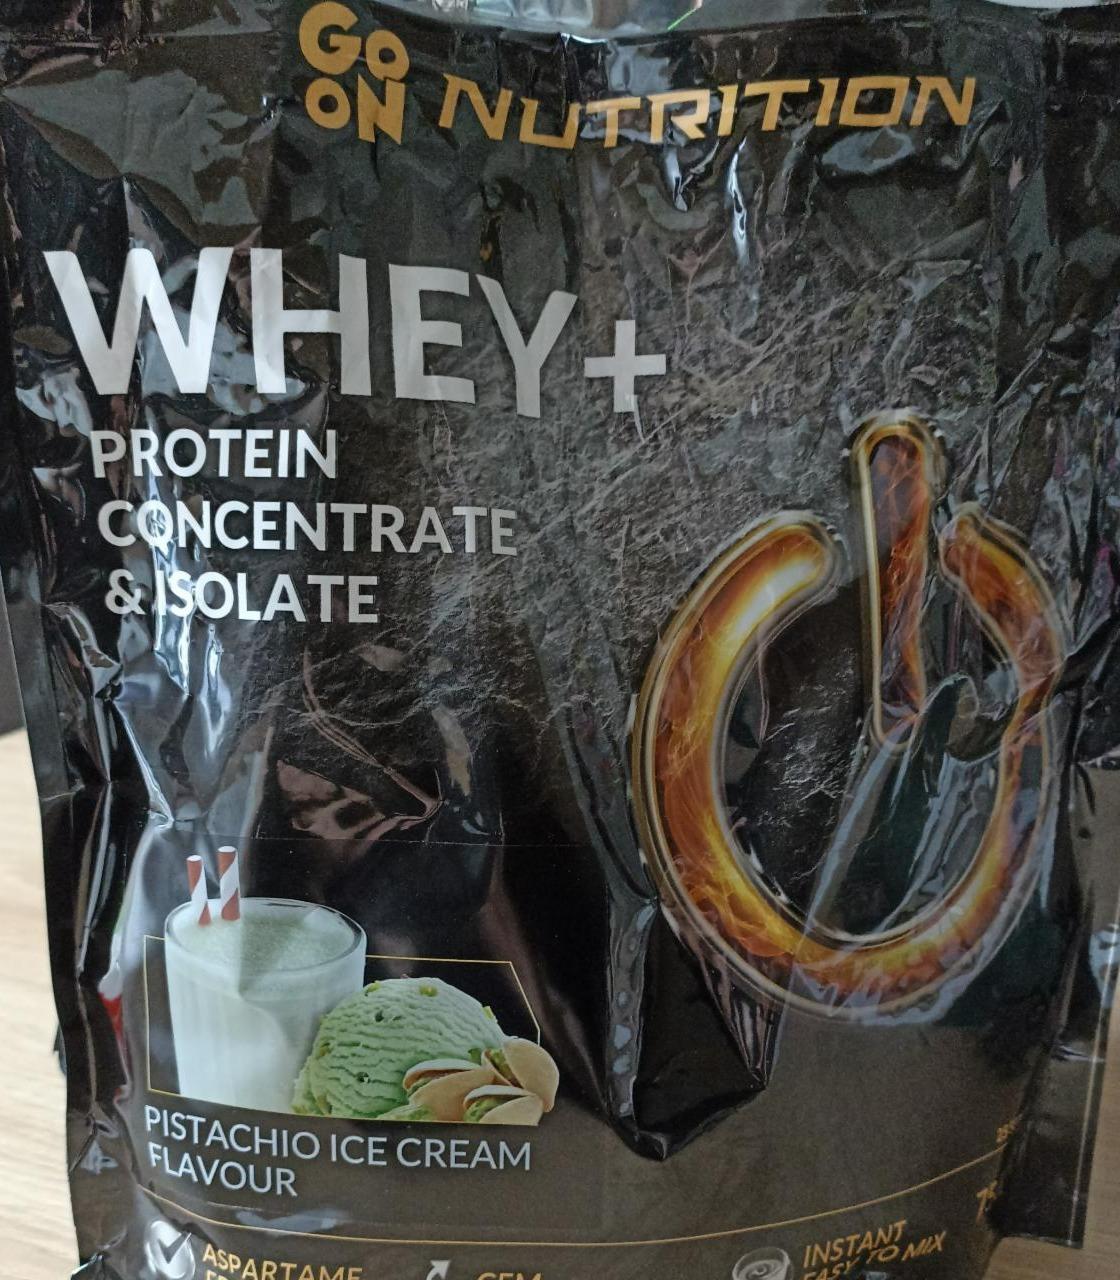 Fotografie - Whey+ Protein concentrate & isolate Pistachio Ice cream Go on nutrition